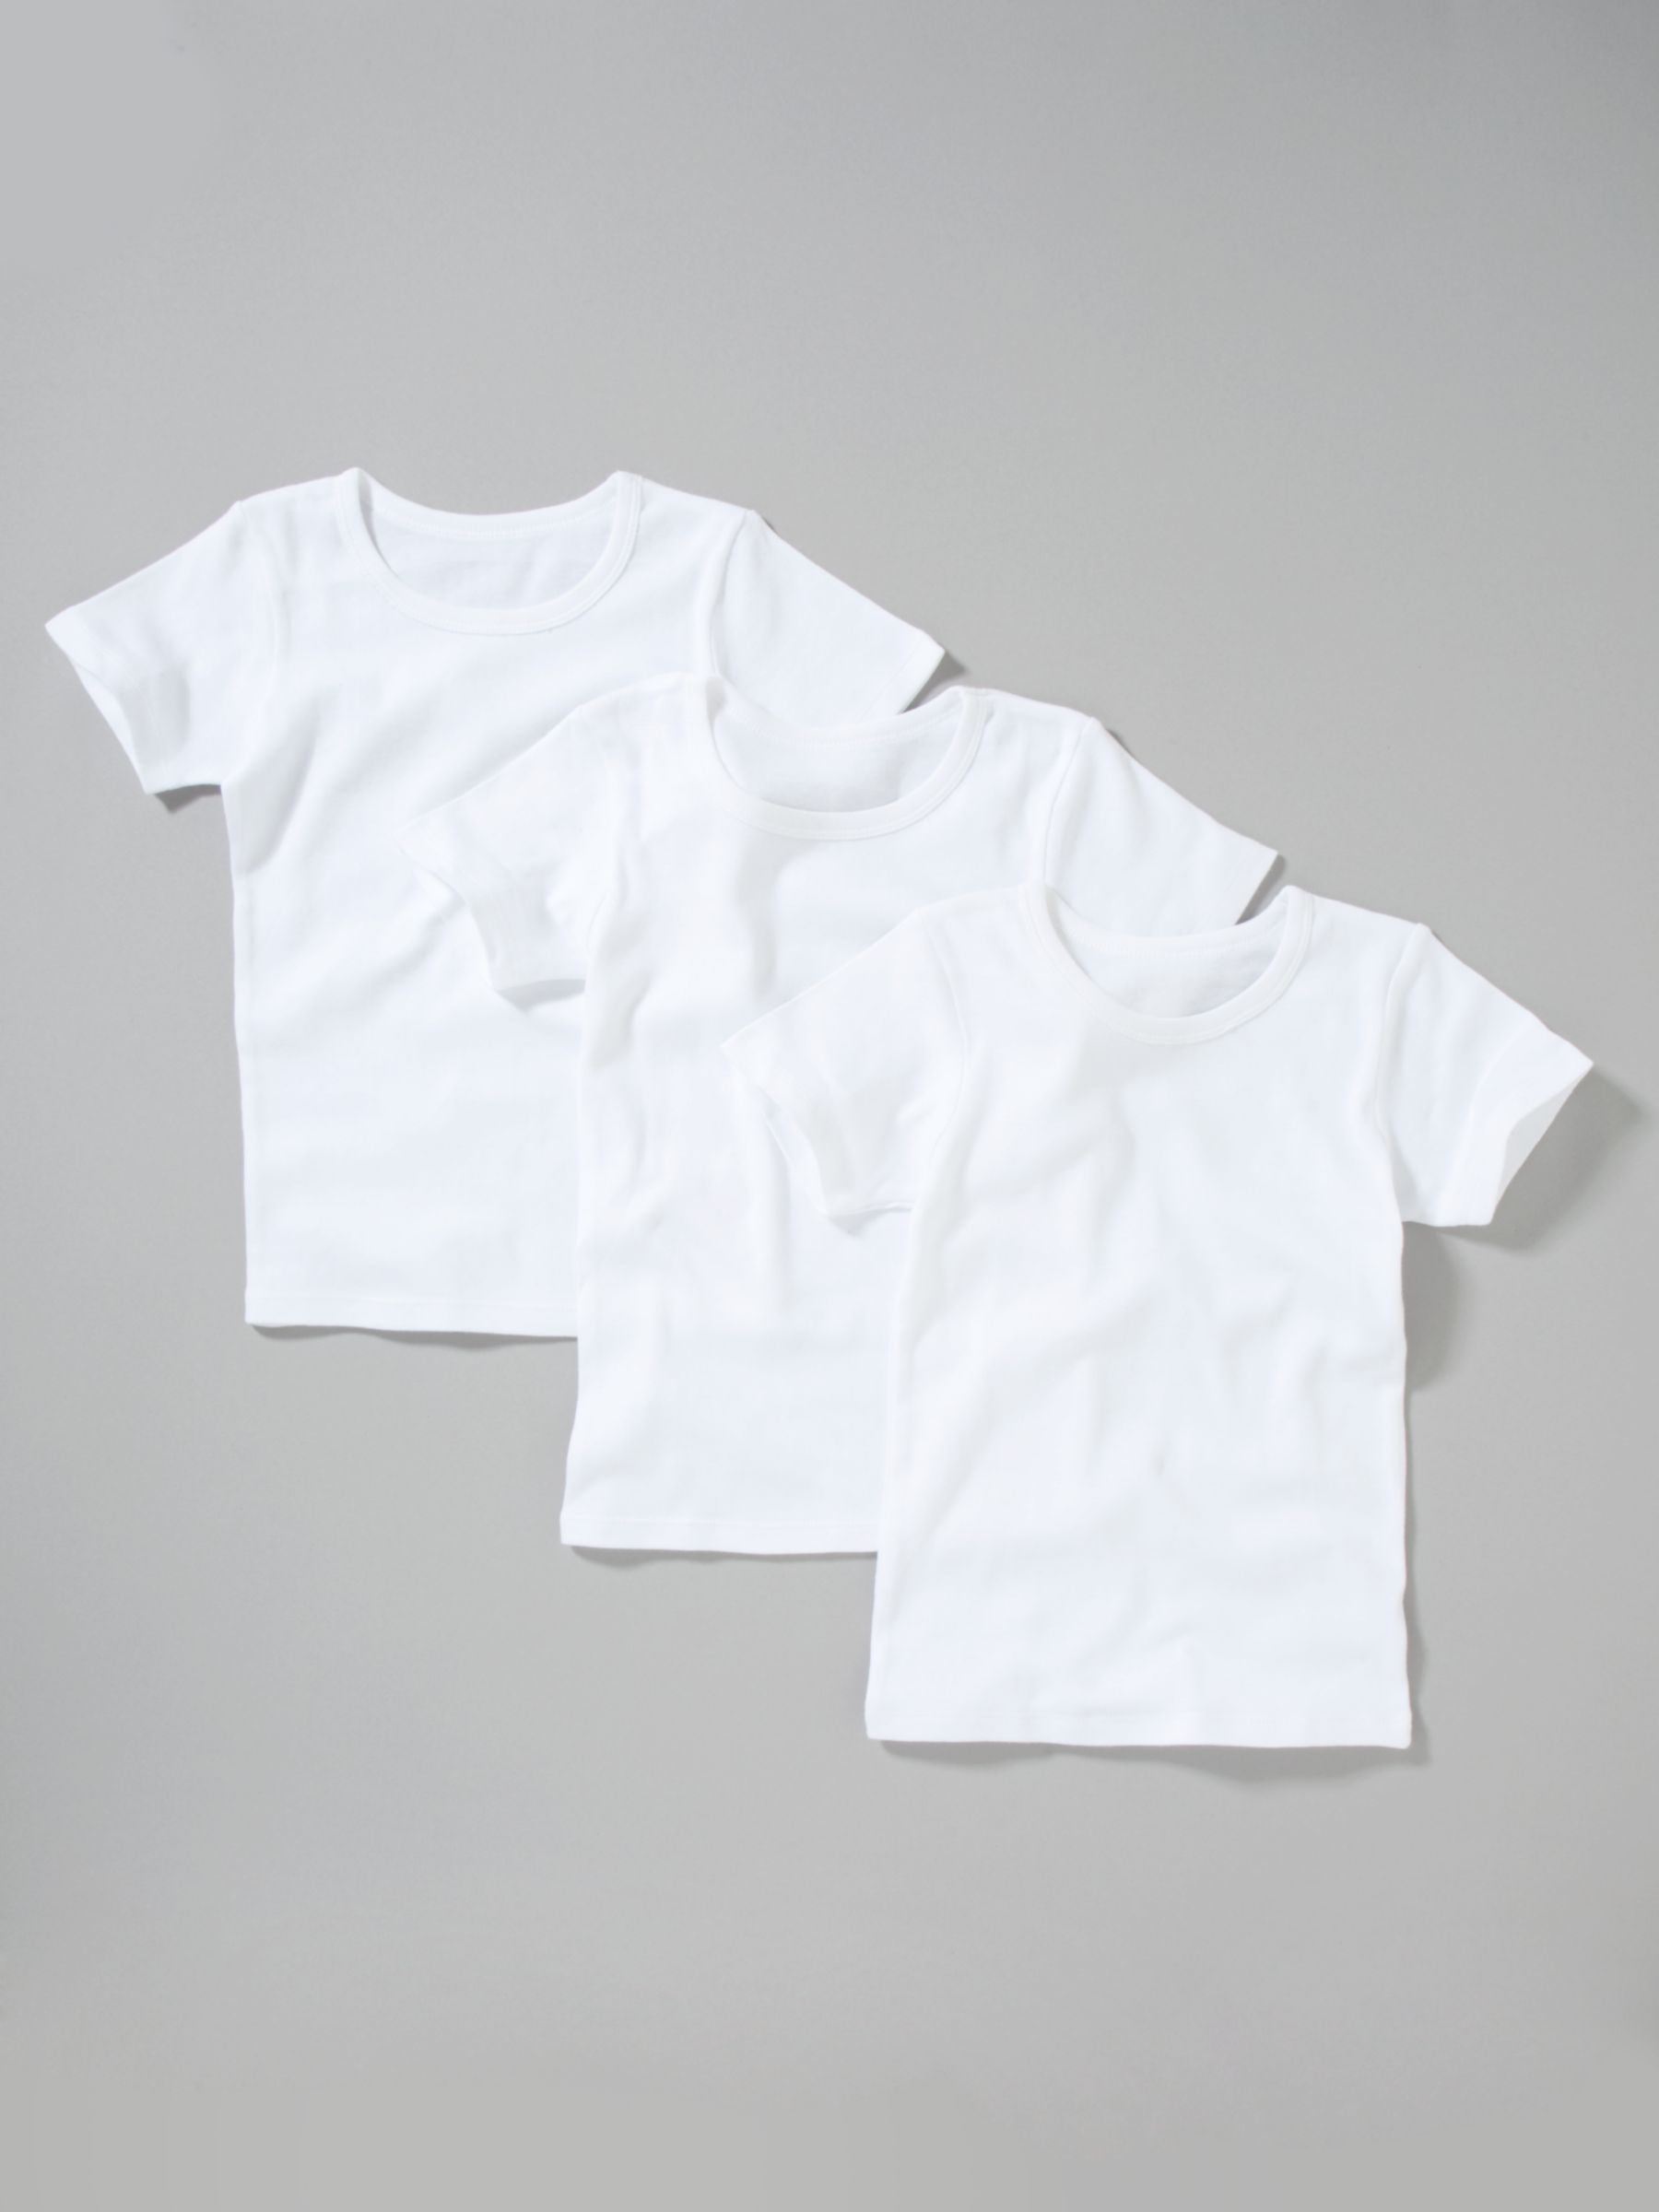 T-Shirt Vests, Pack of 3, size: 2